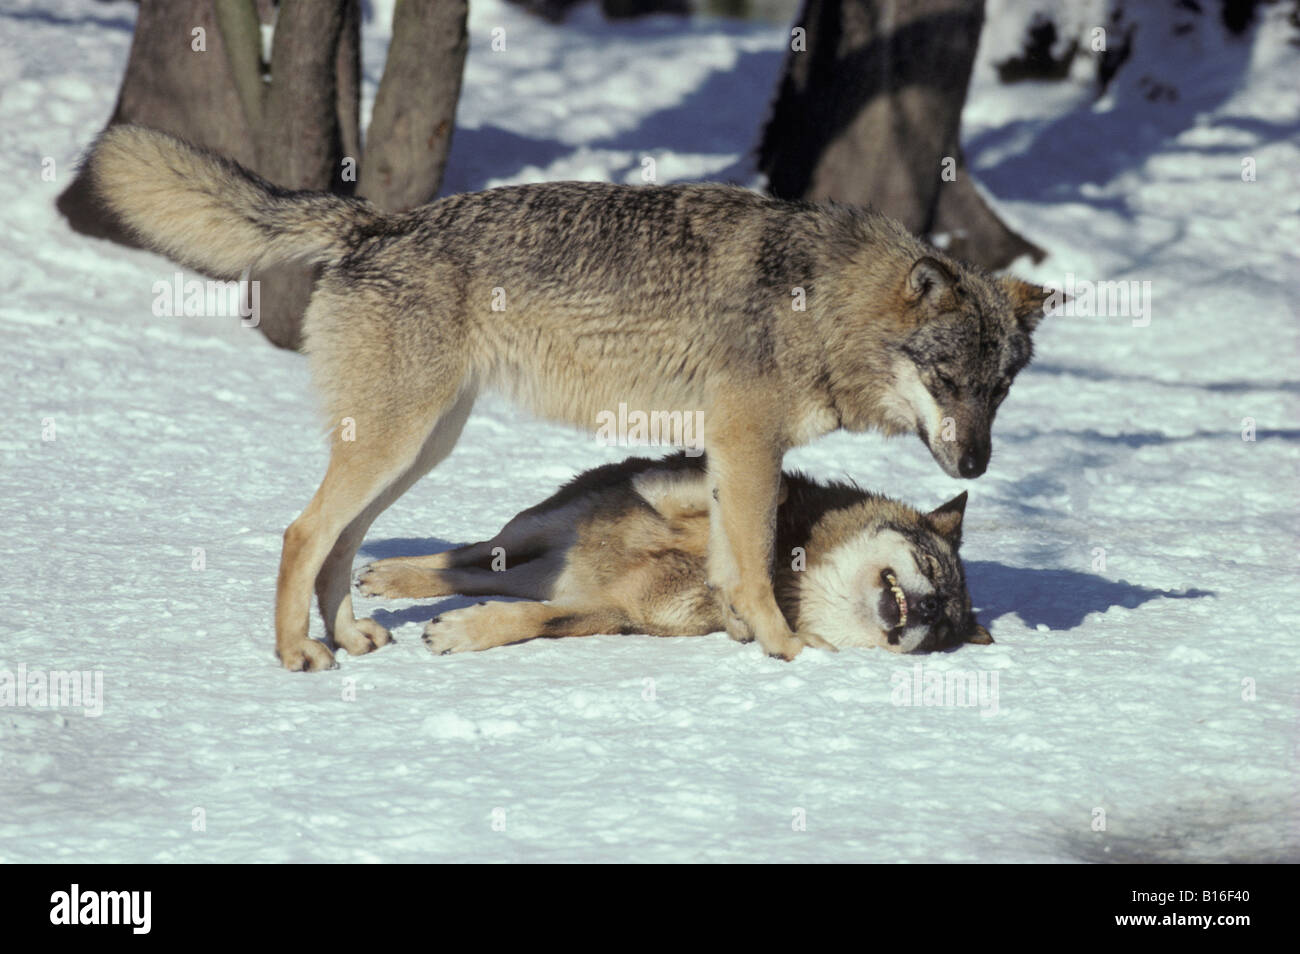 European Wolf Canis lupus two individuals in snow with one lying on its back while the other stands over it animals behaviour Ca Stock Photo